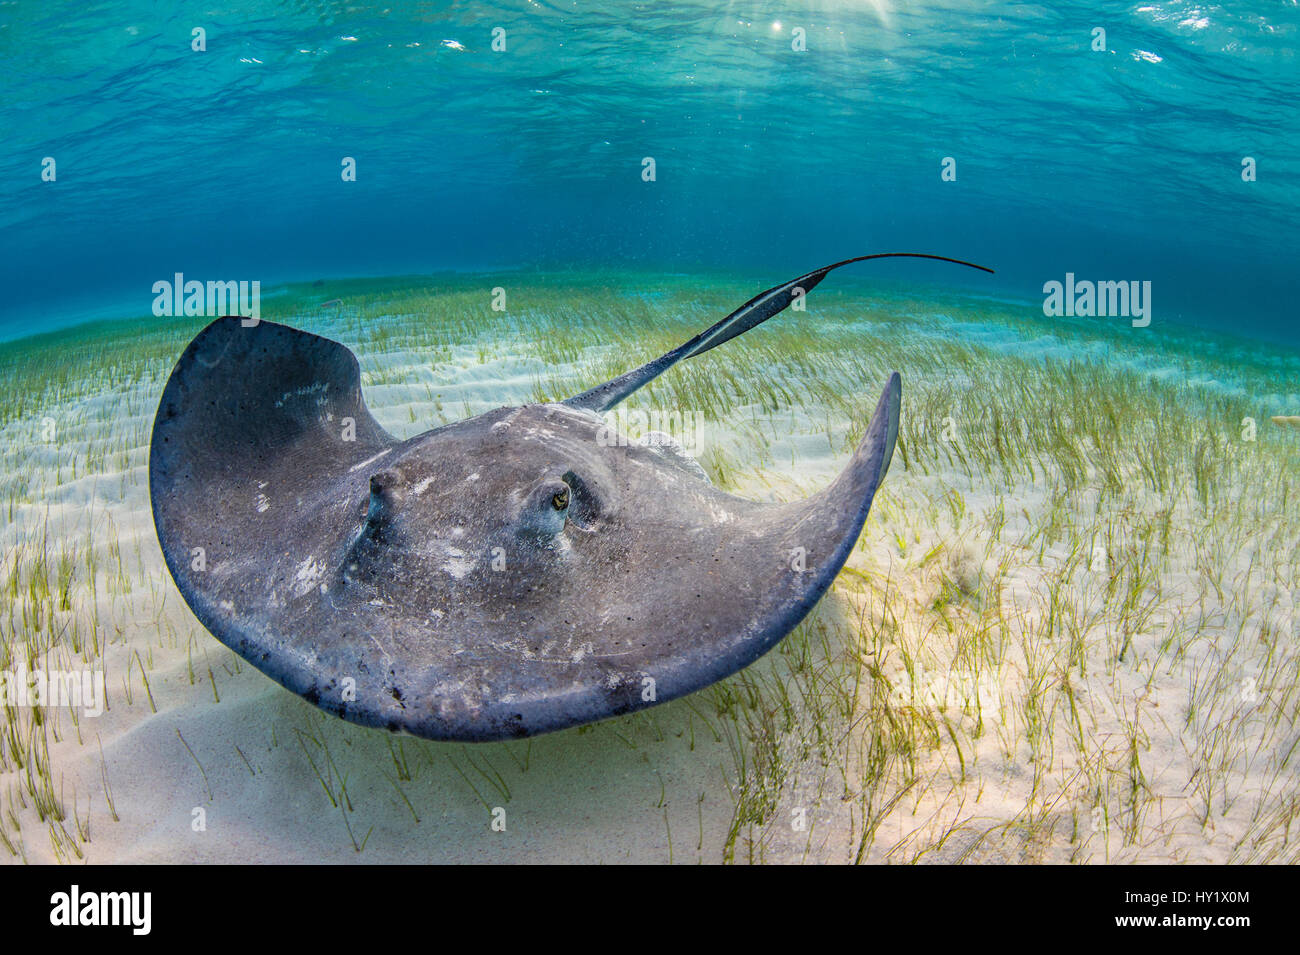 Large female stingray (Dasyatis americana) forages over seagrass in shallow water. The Sandbar, Grand Cayman, Cayman Islands. British West Indies. Caribbean Sea. Stock Photo